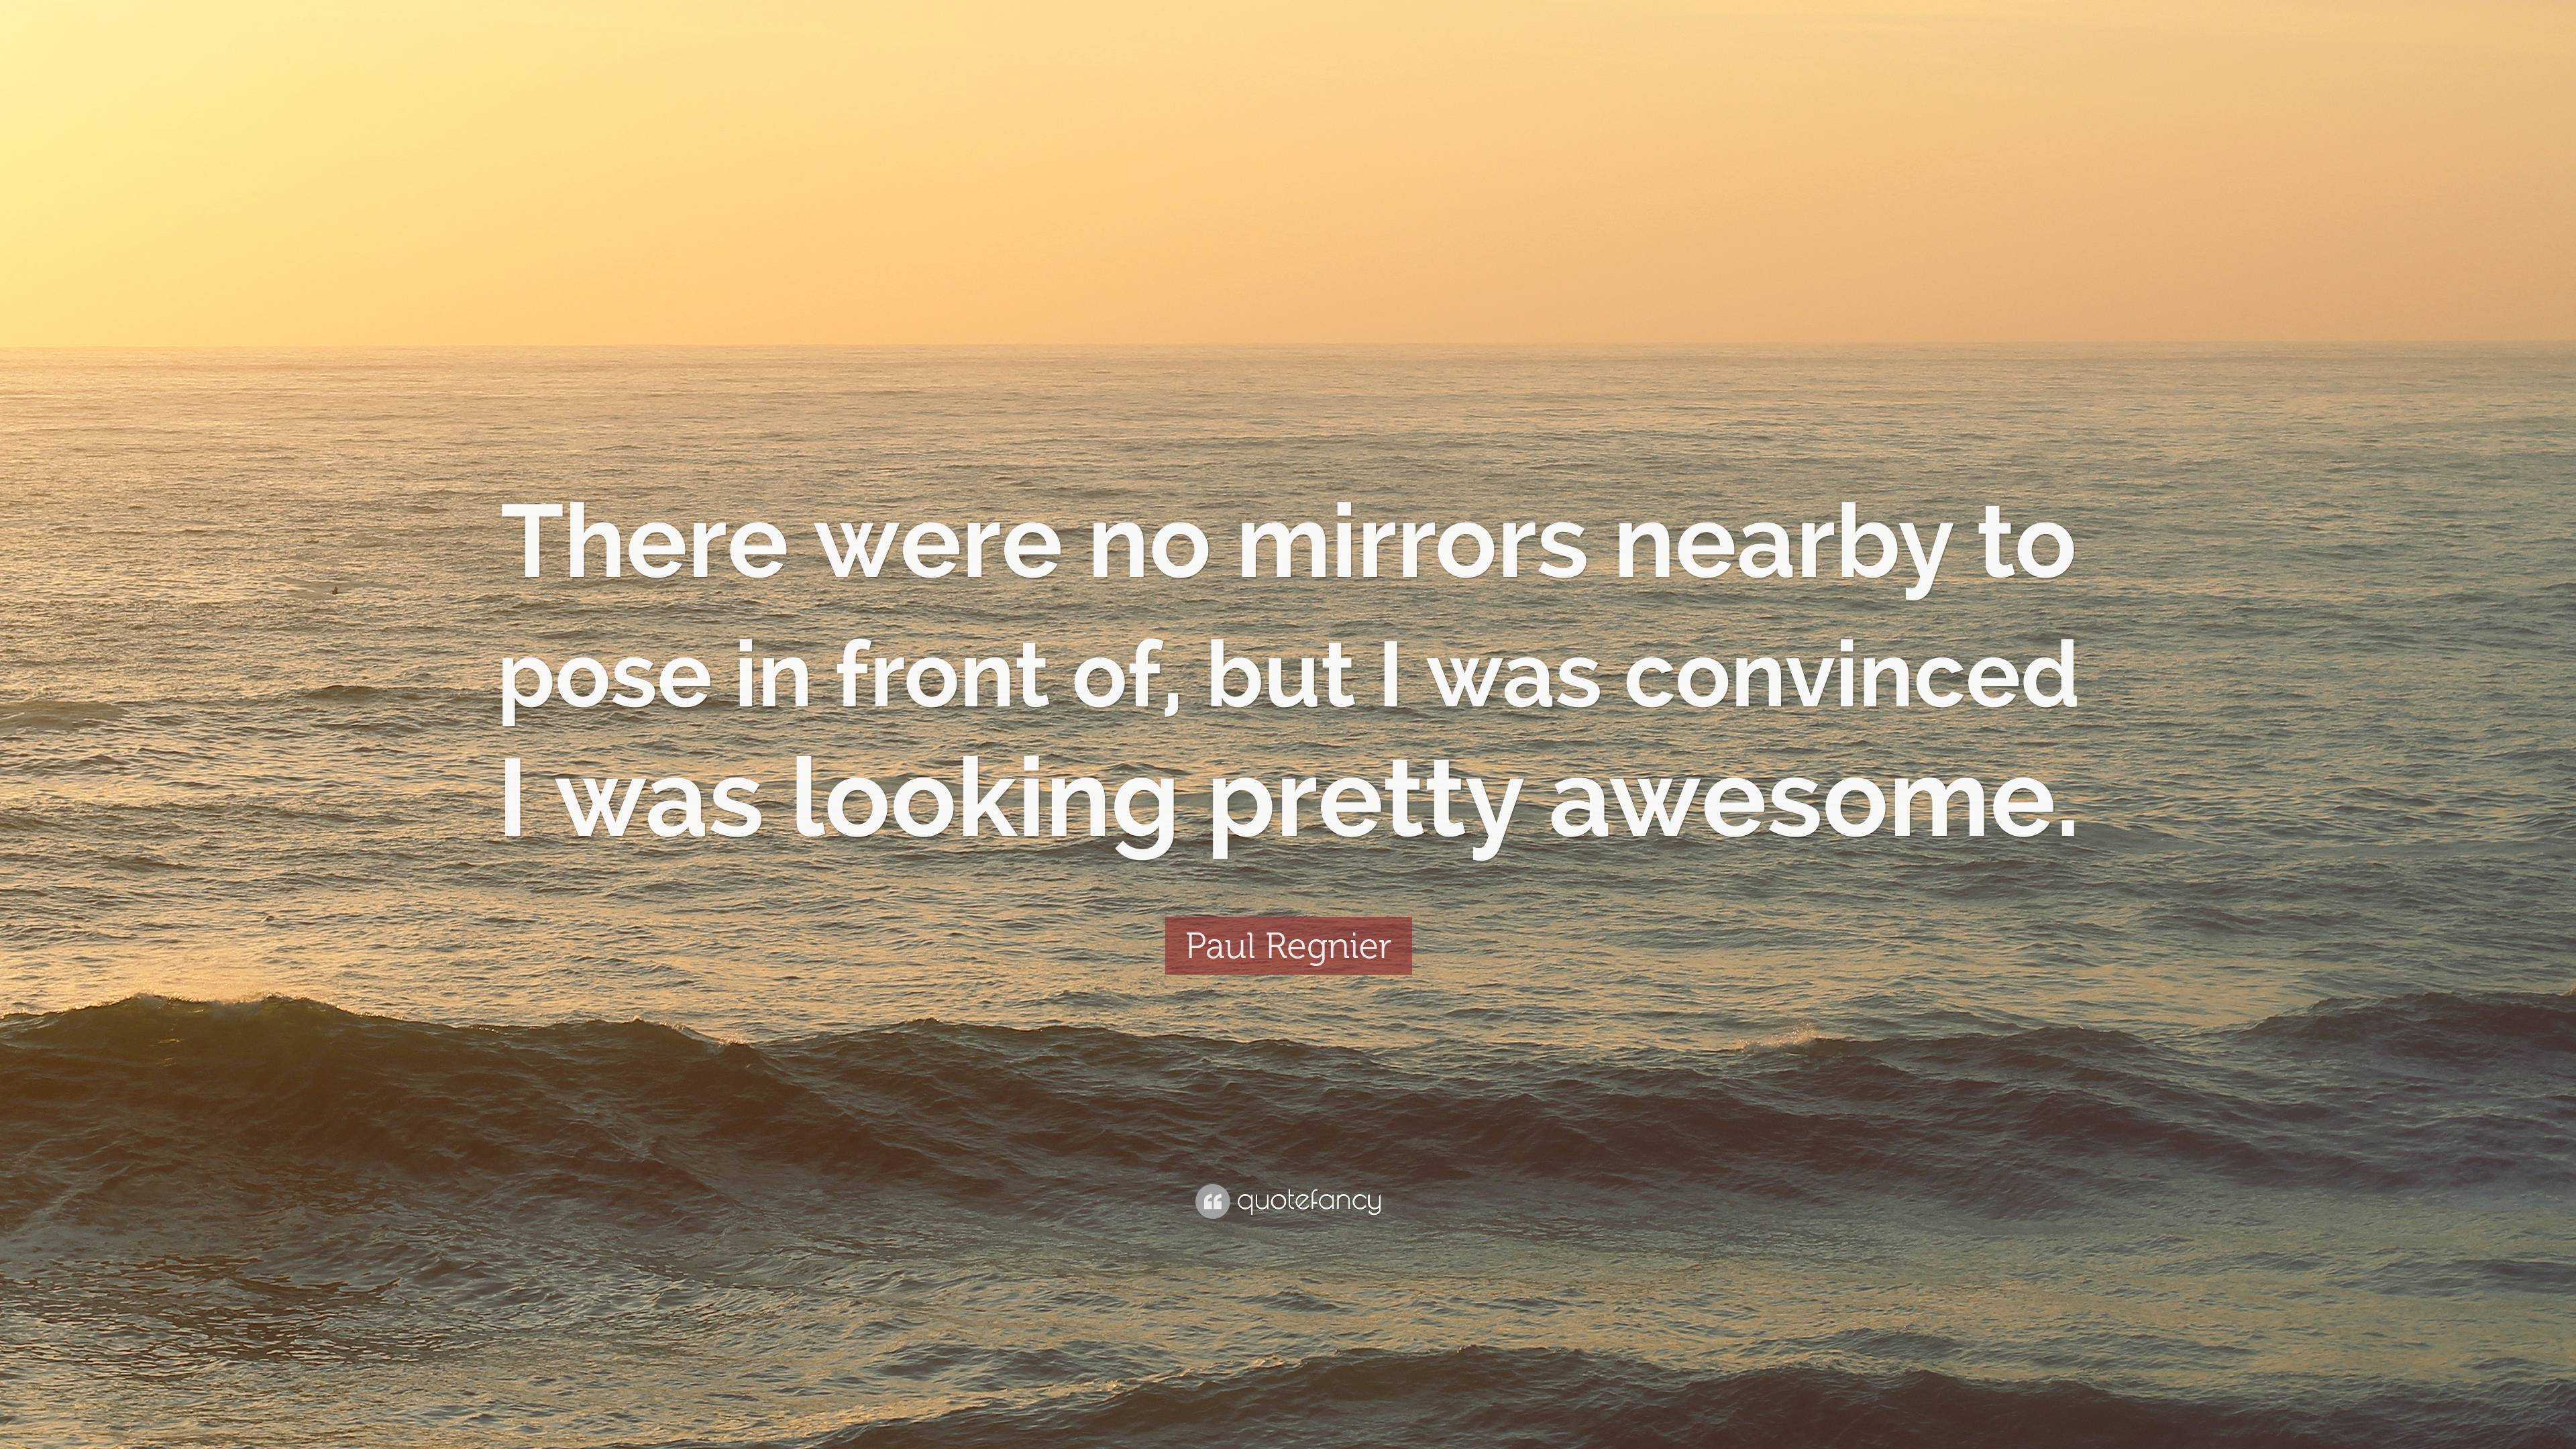 Paul Regnier Quote: “There were no mirrors nearby to pose in front of ...